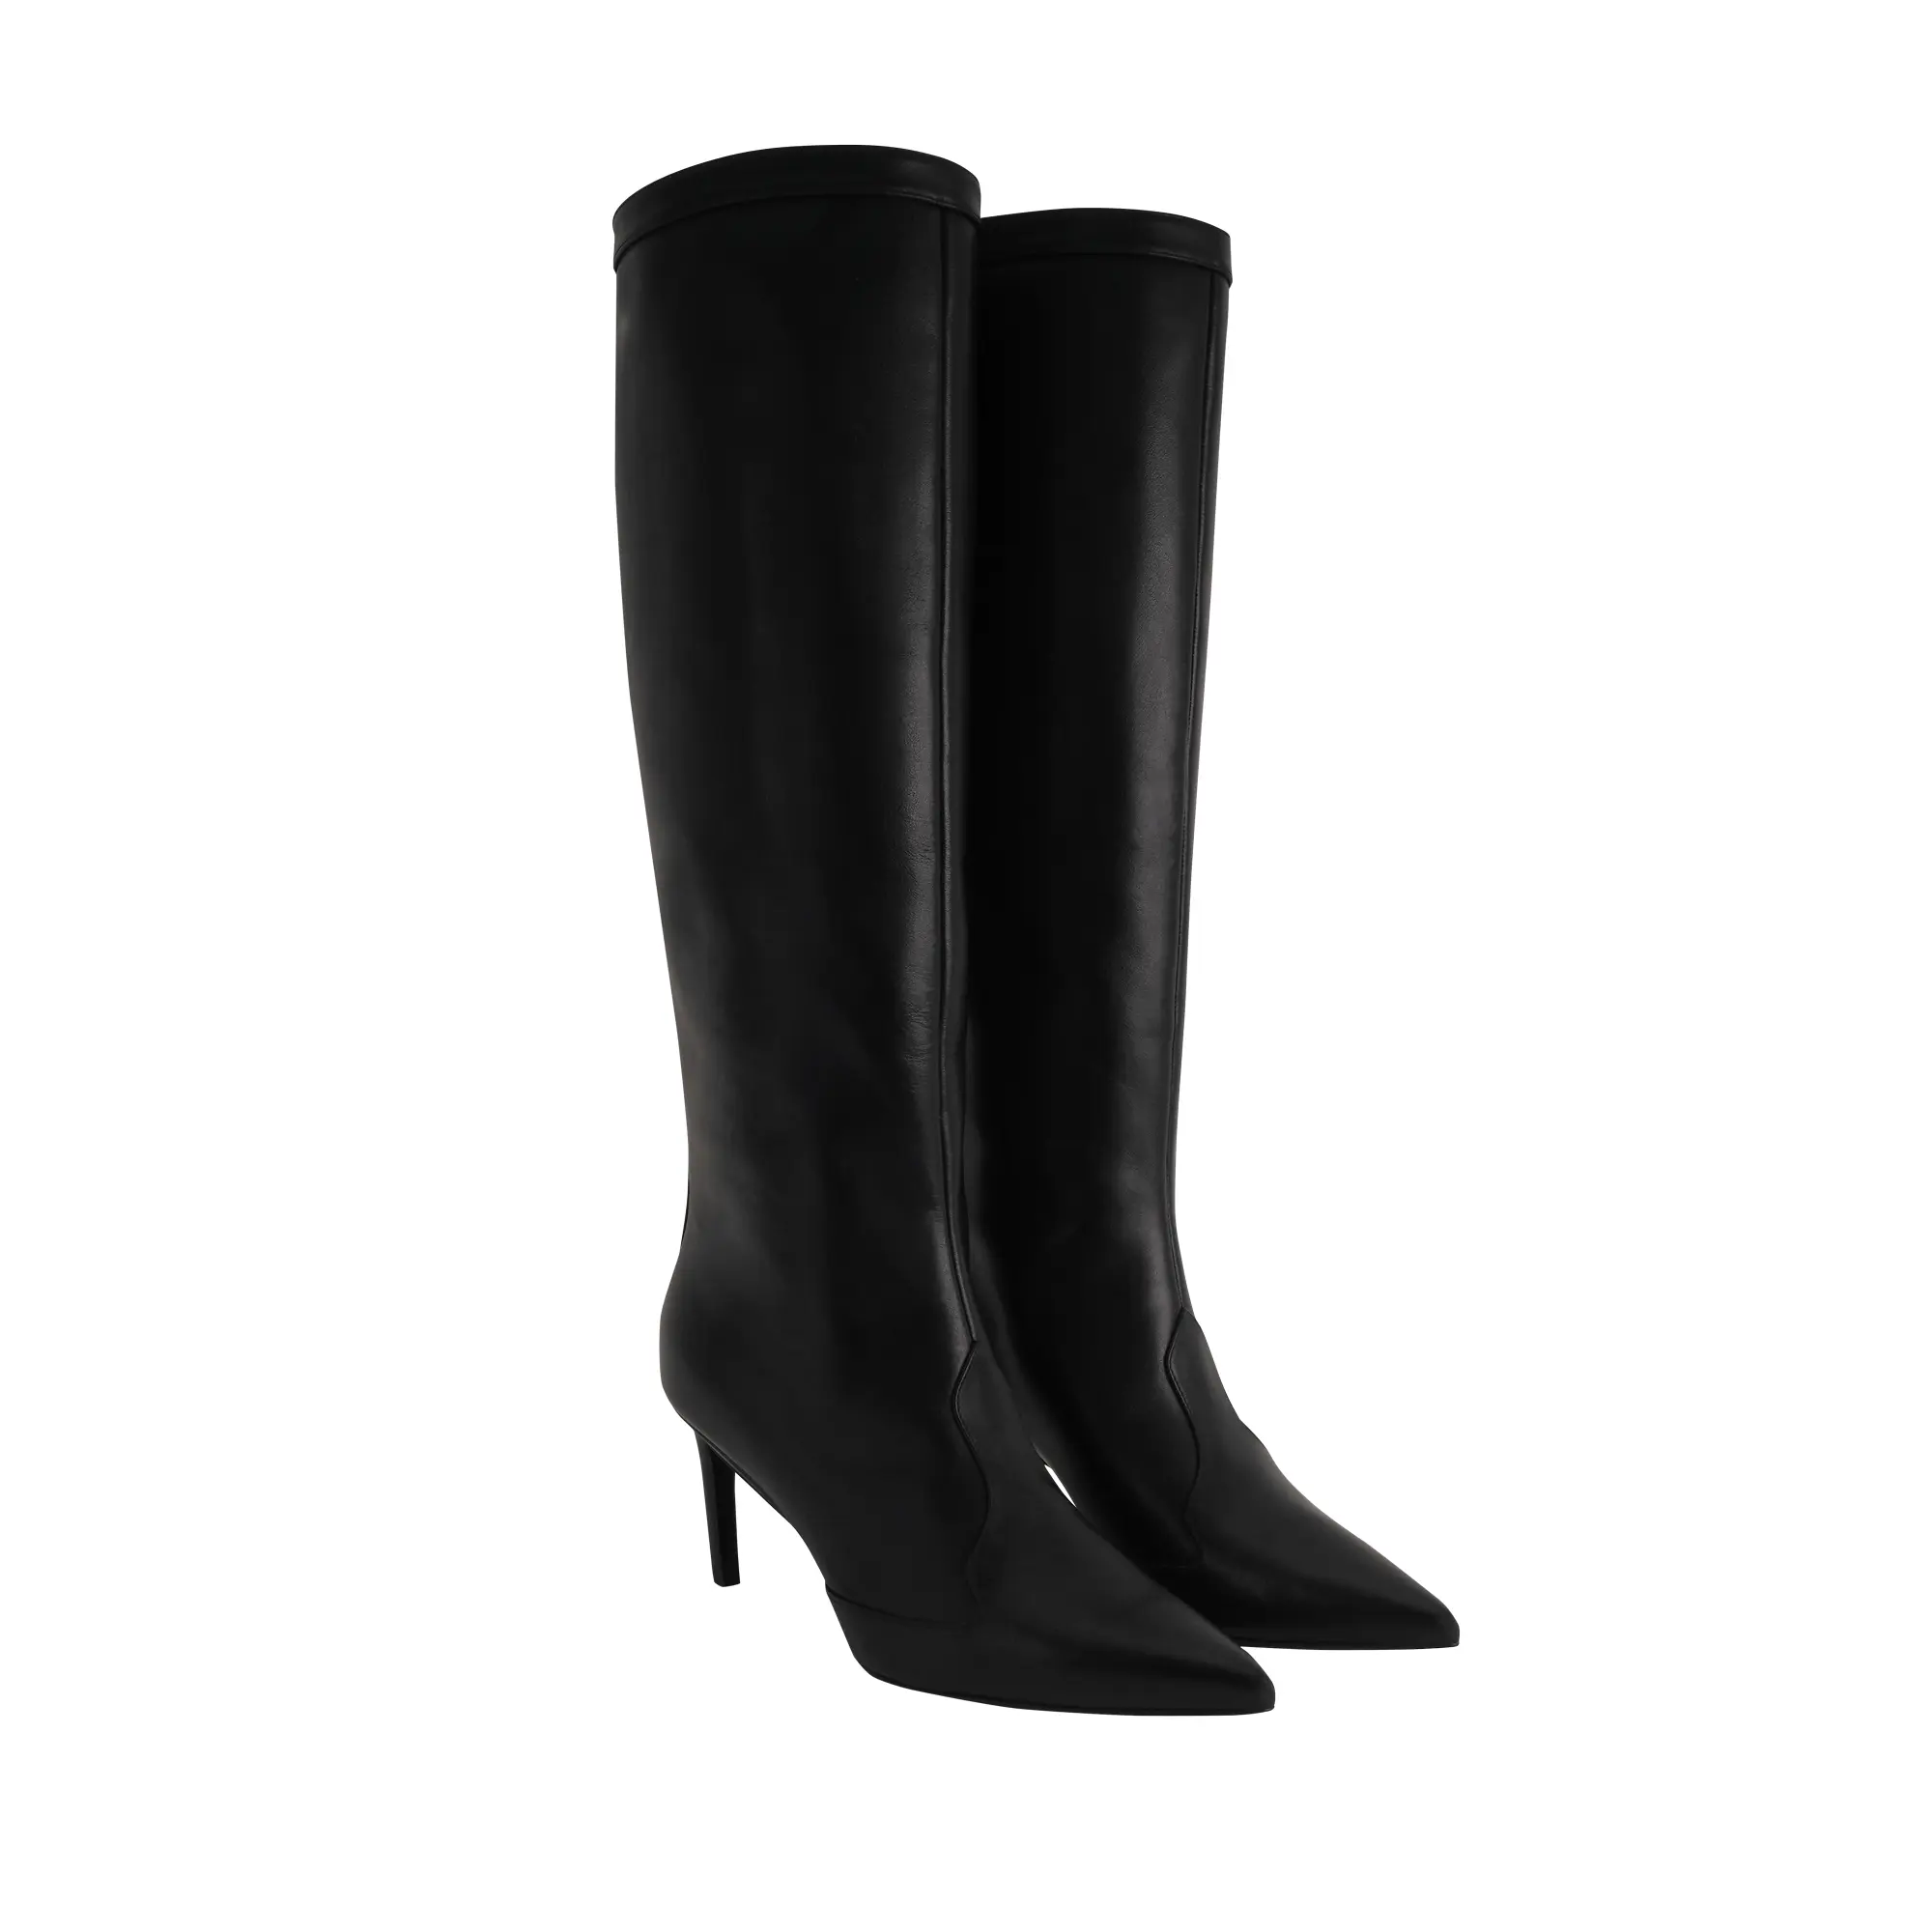 High Quality Italian Leather High Heel Black Boots Nancy Shoes for Women